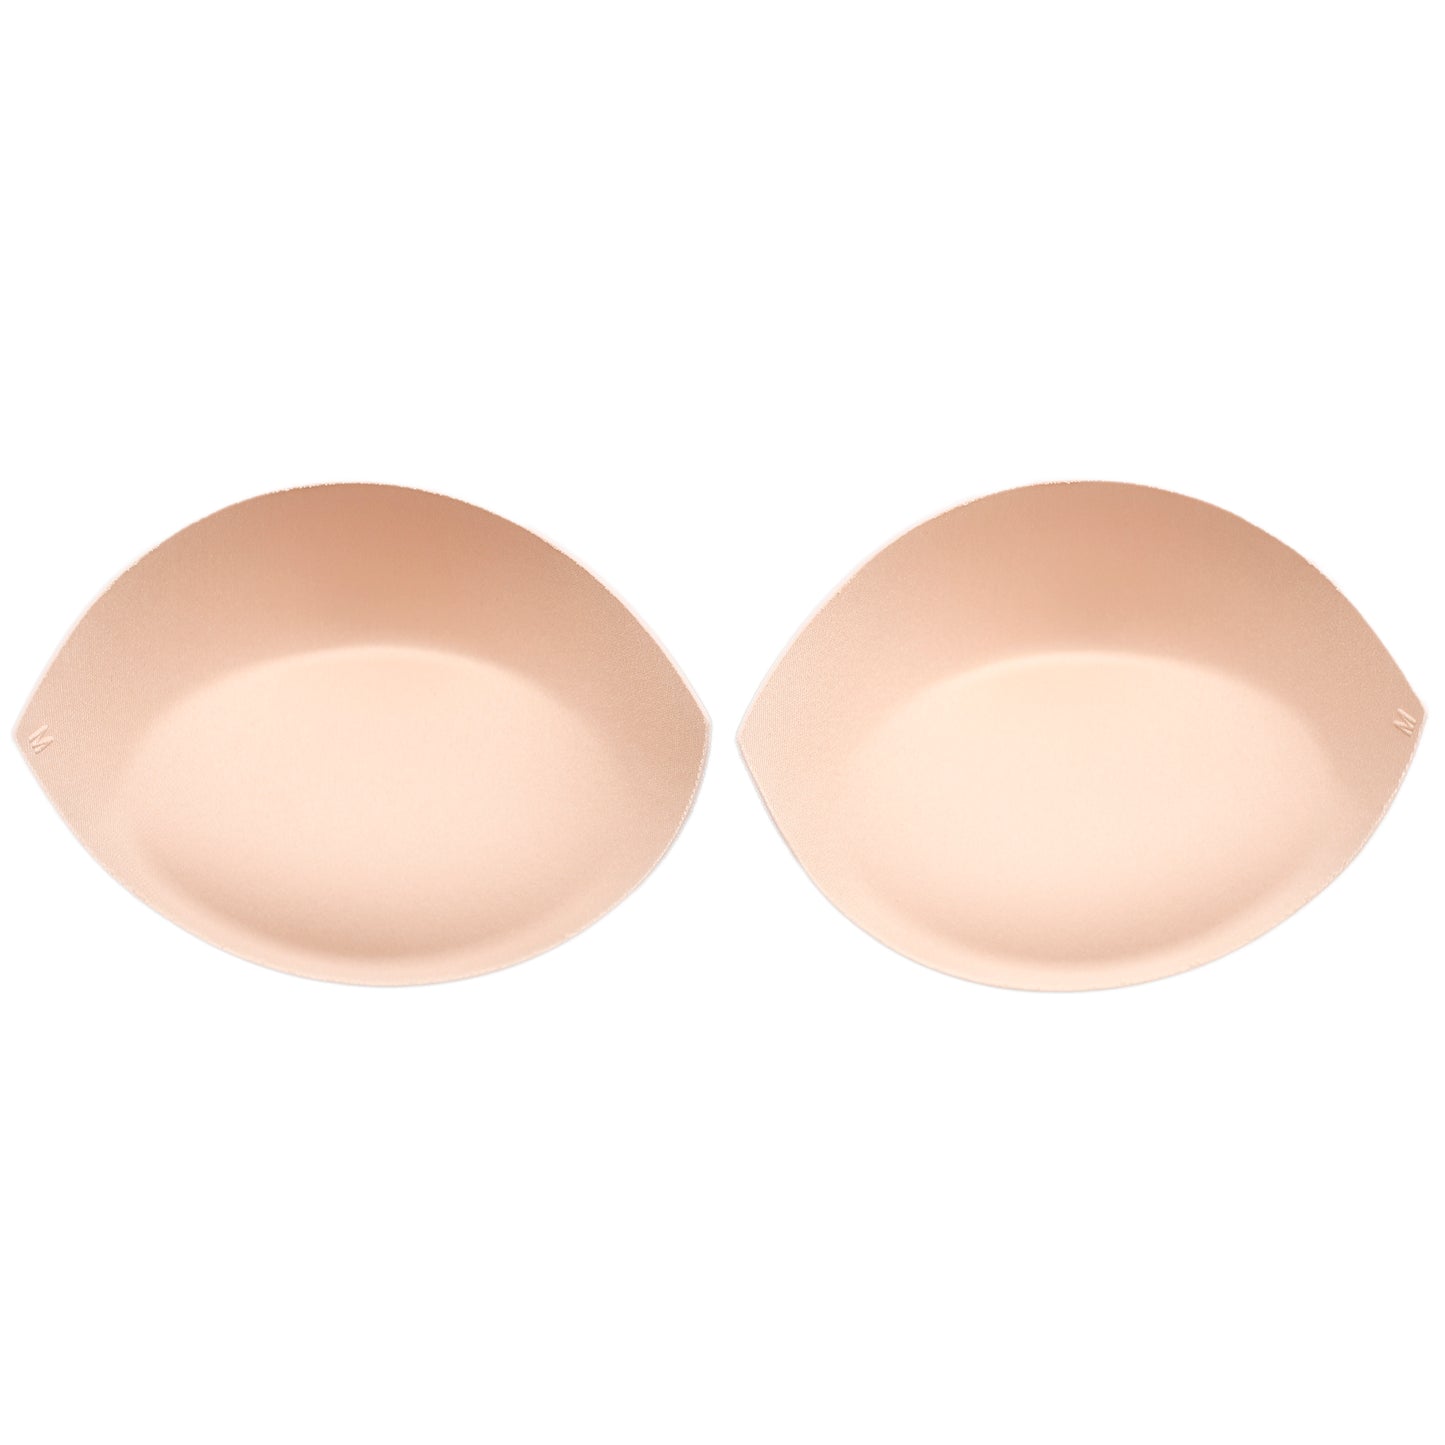 SOFT-TOUCH PUSH UP BRA CUP NEUTRAL/ NUDE